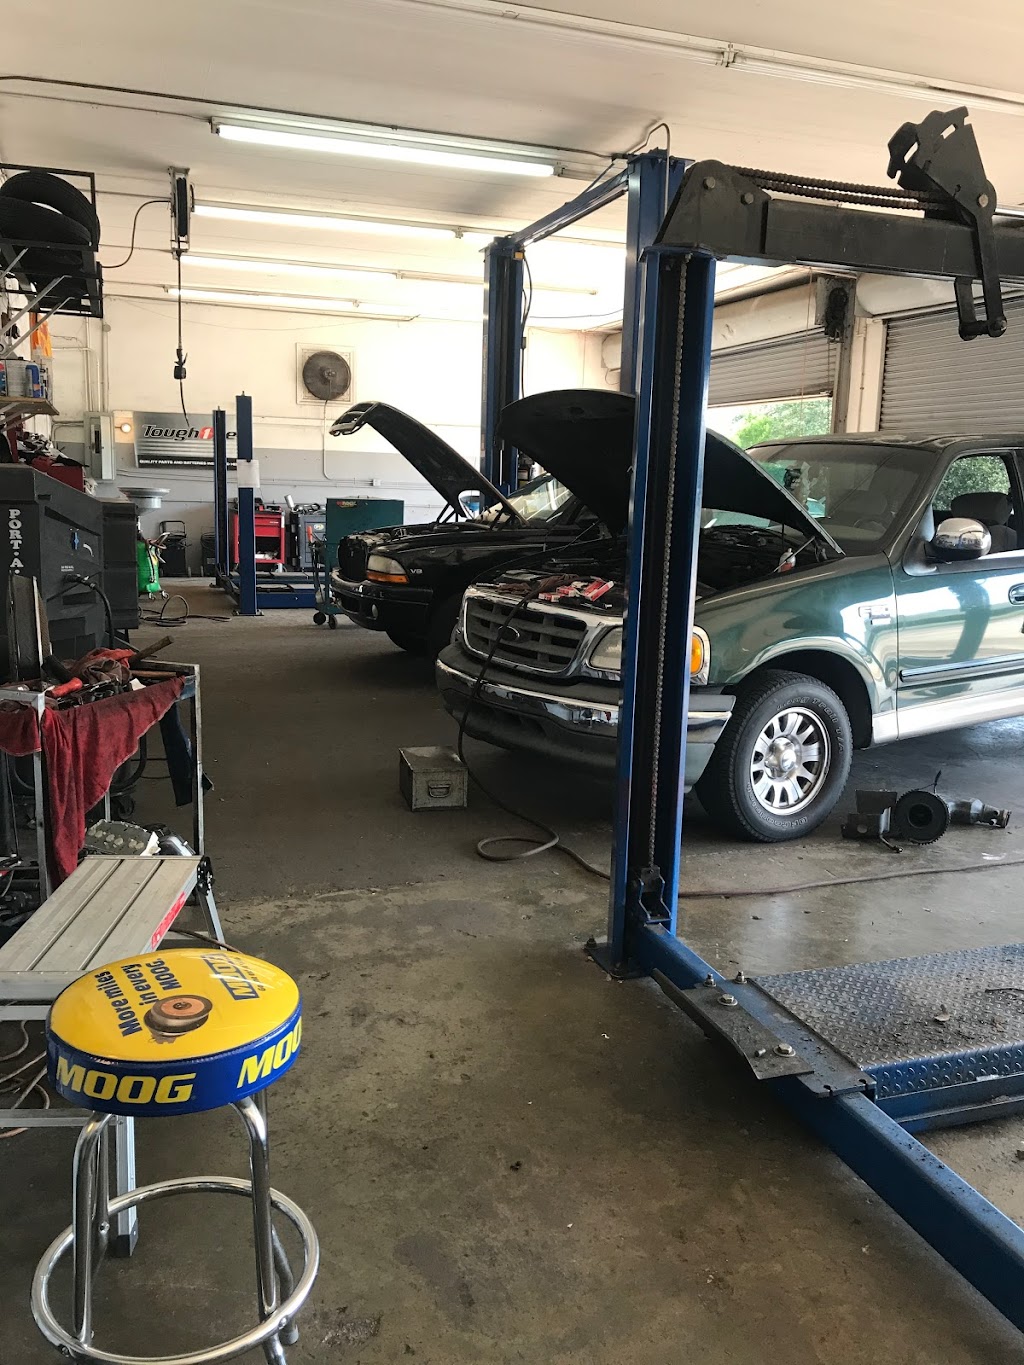 Bens Accurate Automotive | 7265 Forest Oaks Blvd, Spring Hill, FL 34606 | Phone: (352) 684-8100